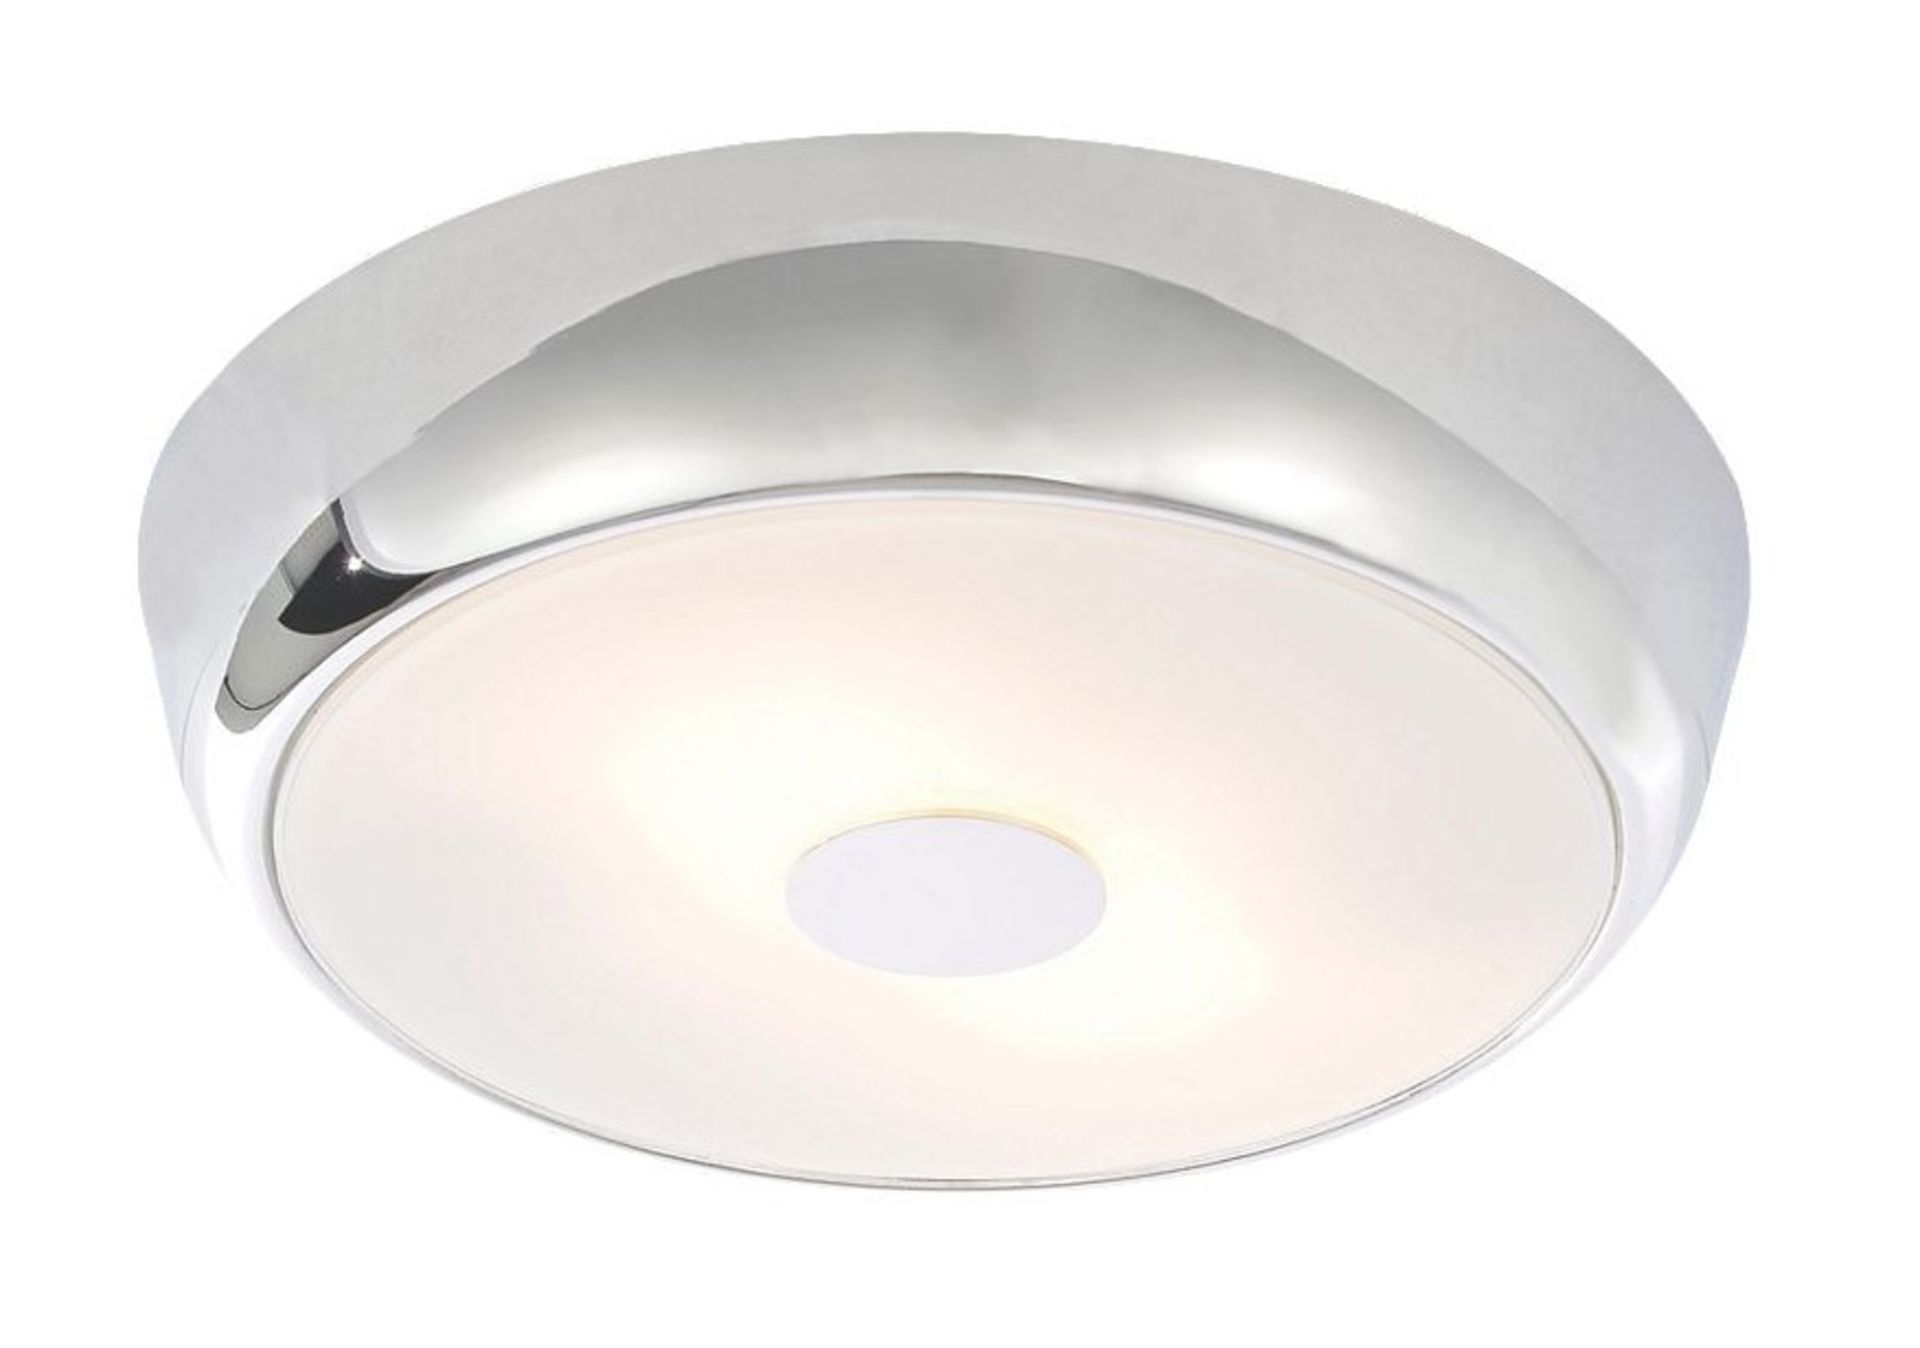 1 x Spa Bathroom Lighting - Orion Ceiling Light Large Chrome - Unused Boxed Stock - CL011 -